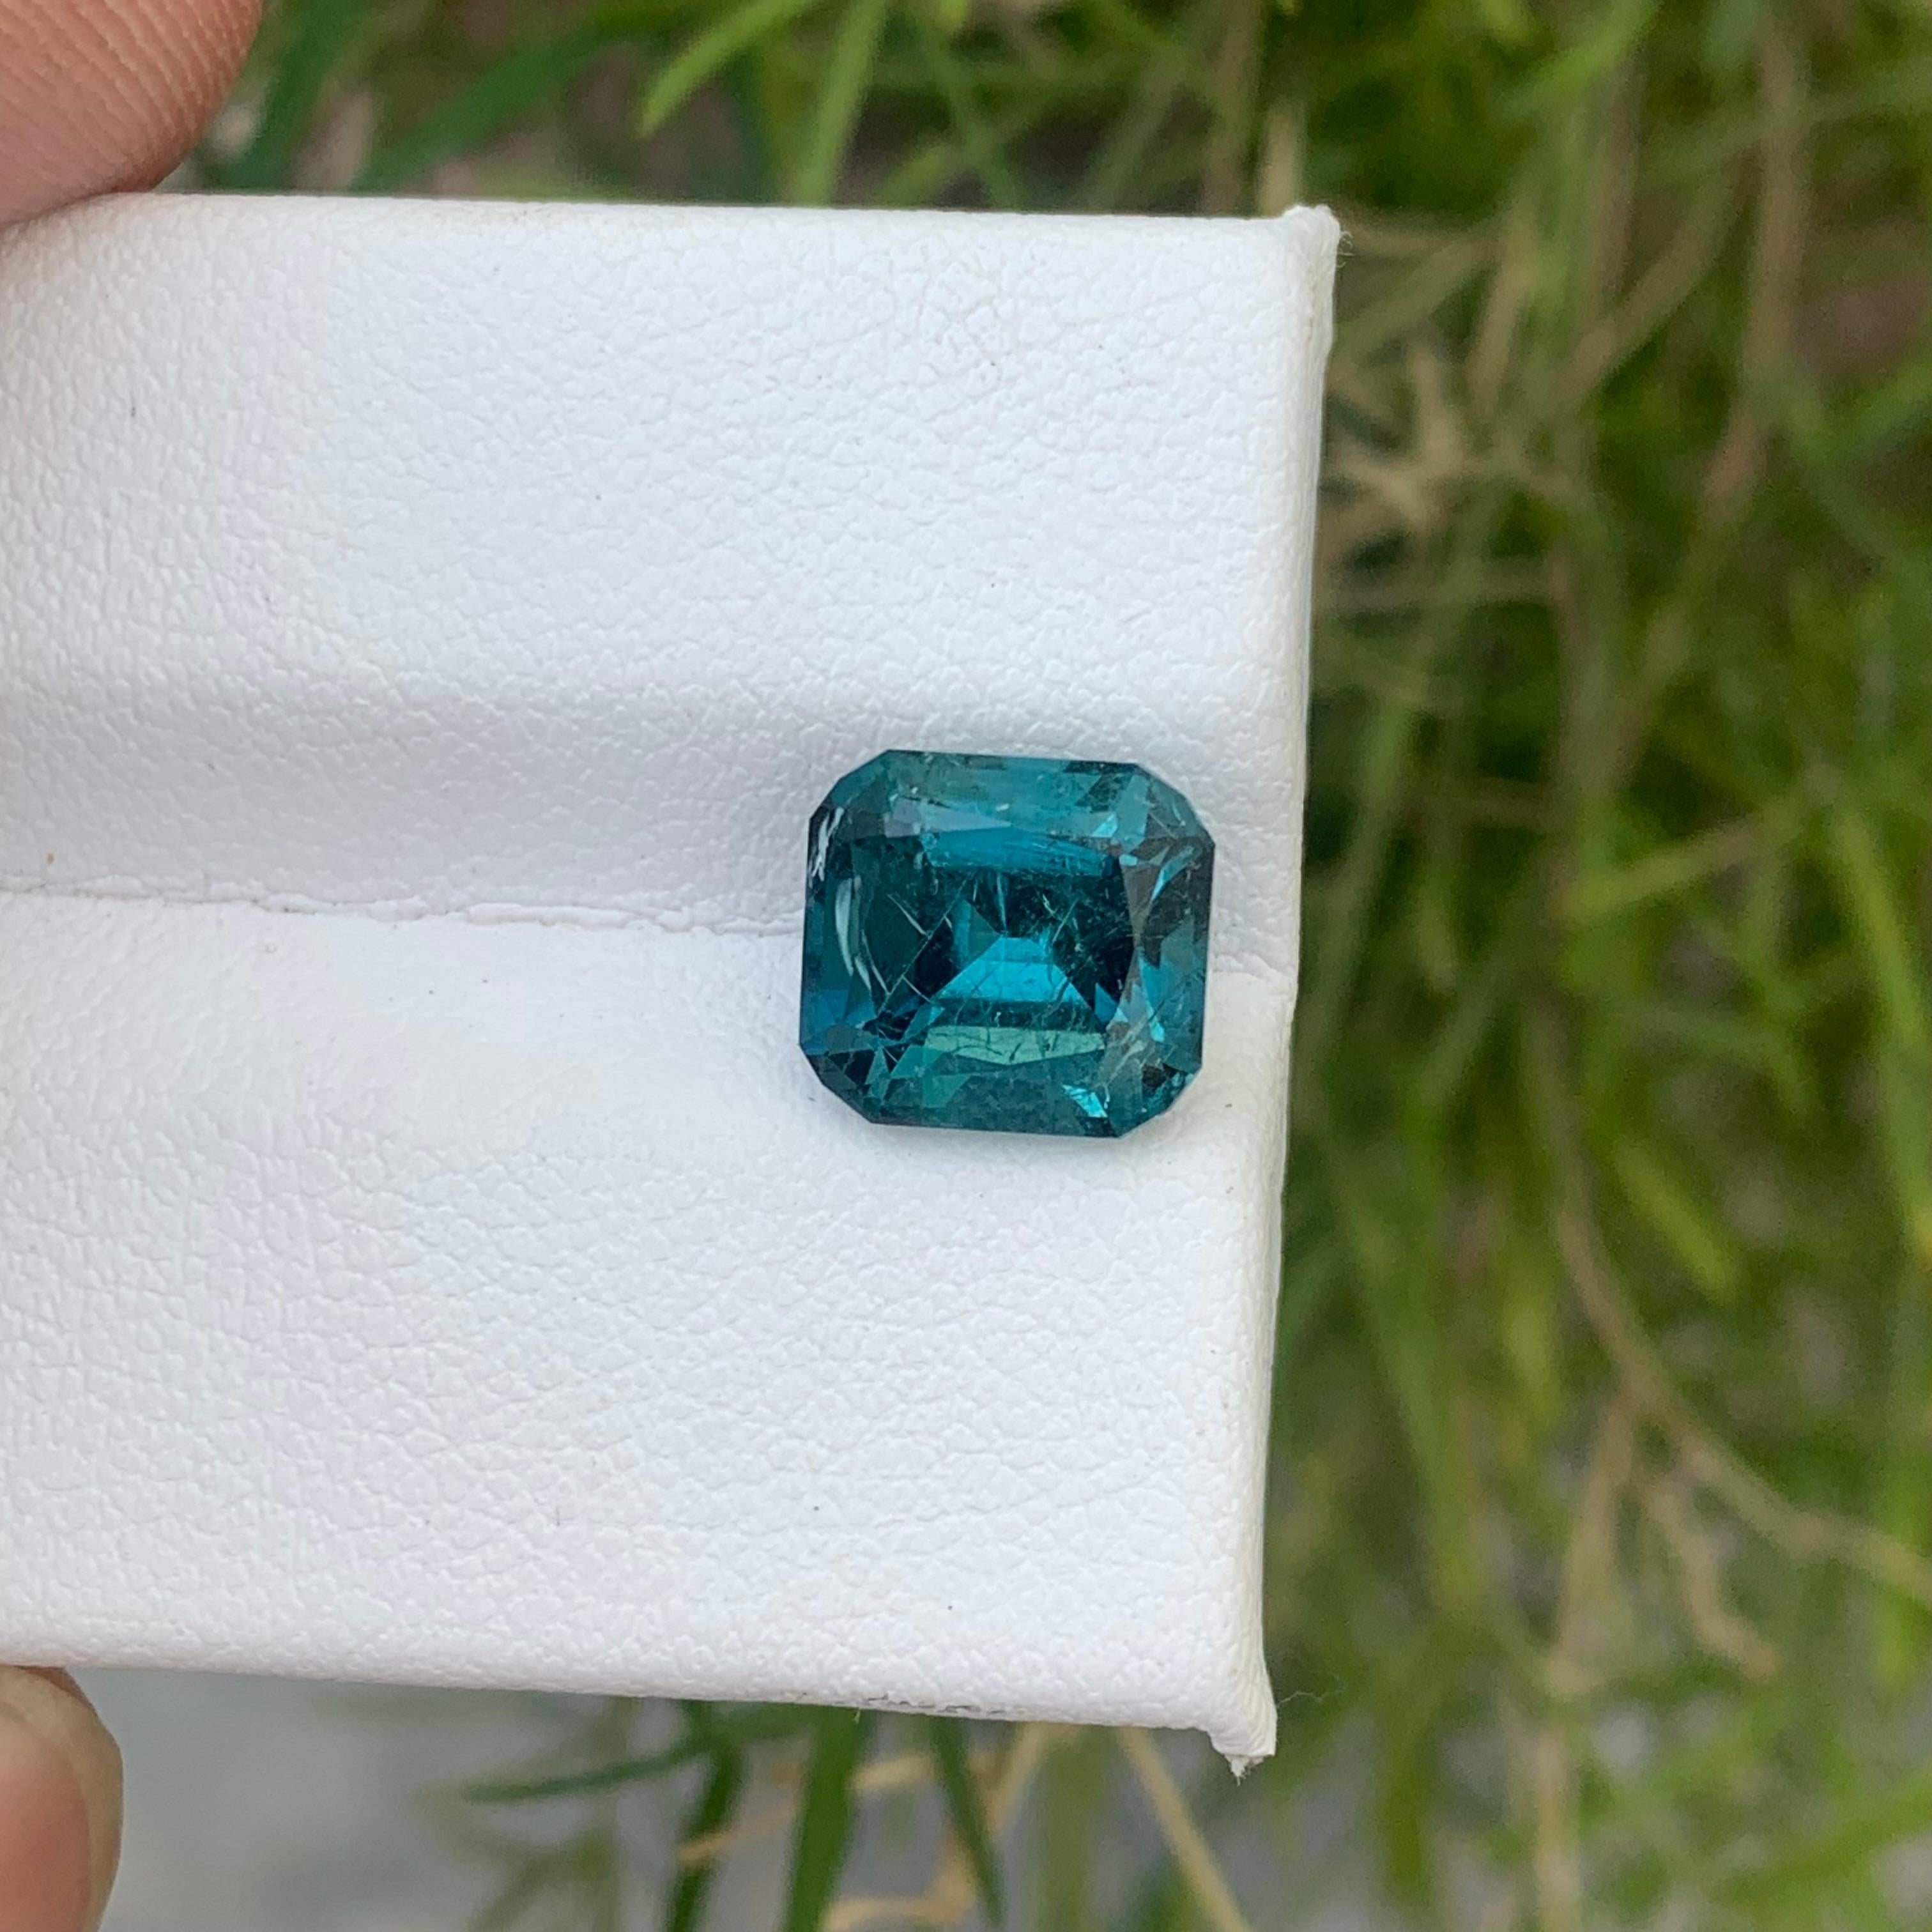 Included Loose Indicolite Tourmaline
Weight: 3.50 Carats
Dimension: 8.9x8.2x6.4 Mm
Origin; Kunar Afghanistan Mine
Color: Neon blue
Shape: Cushion
Clarity: Included
Treatment: Non
Certificate: On Demand
Indicolite tourmalines (tourmalines with blue